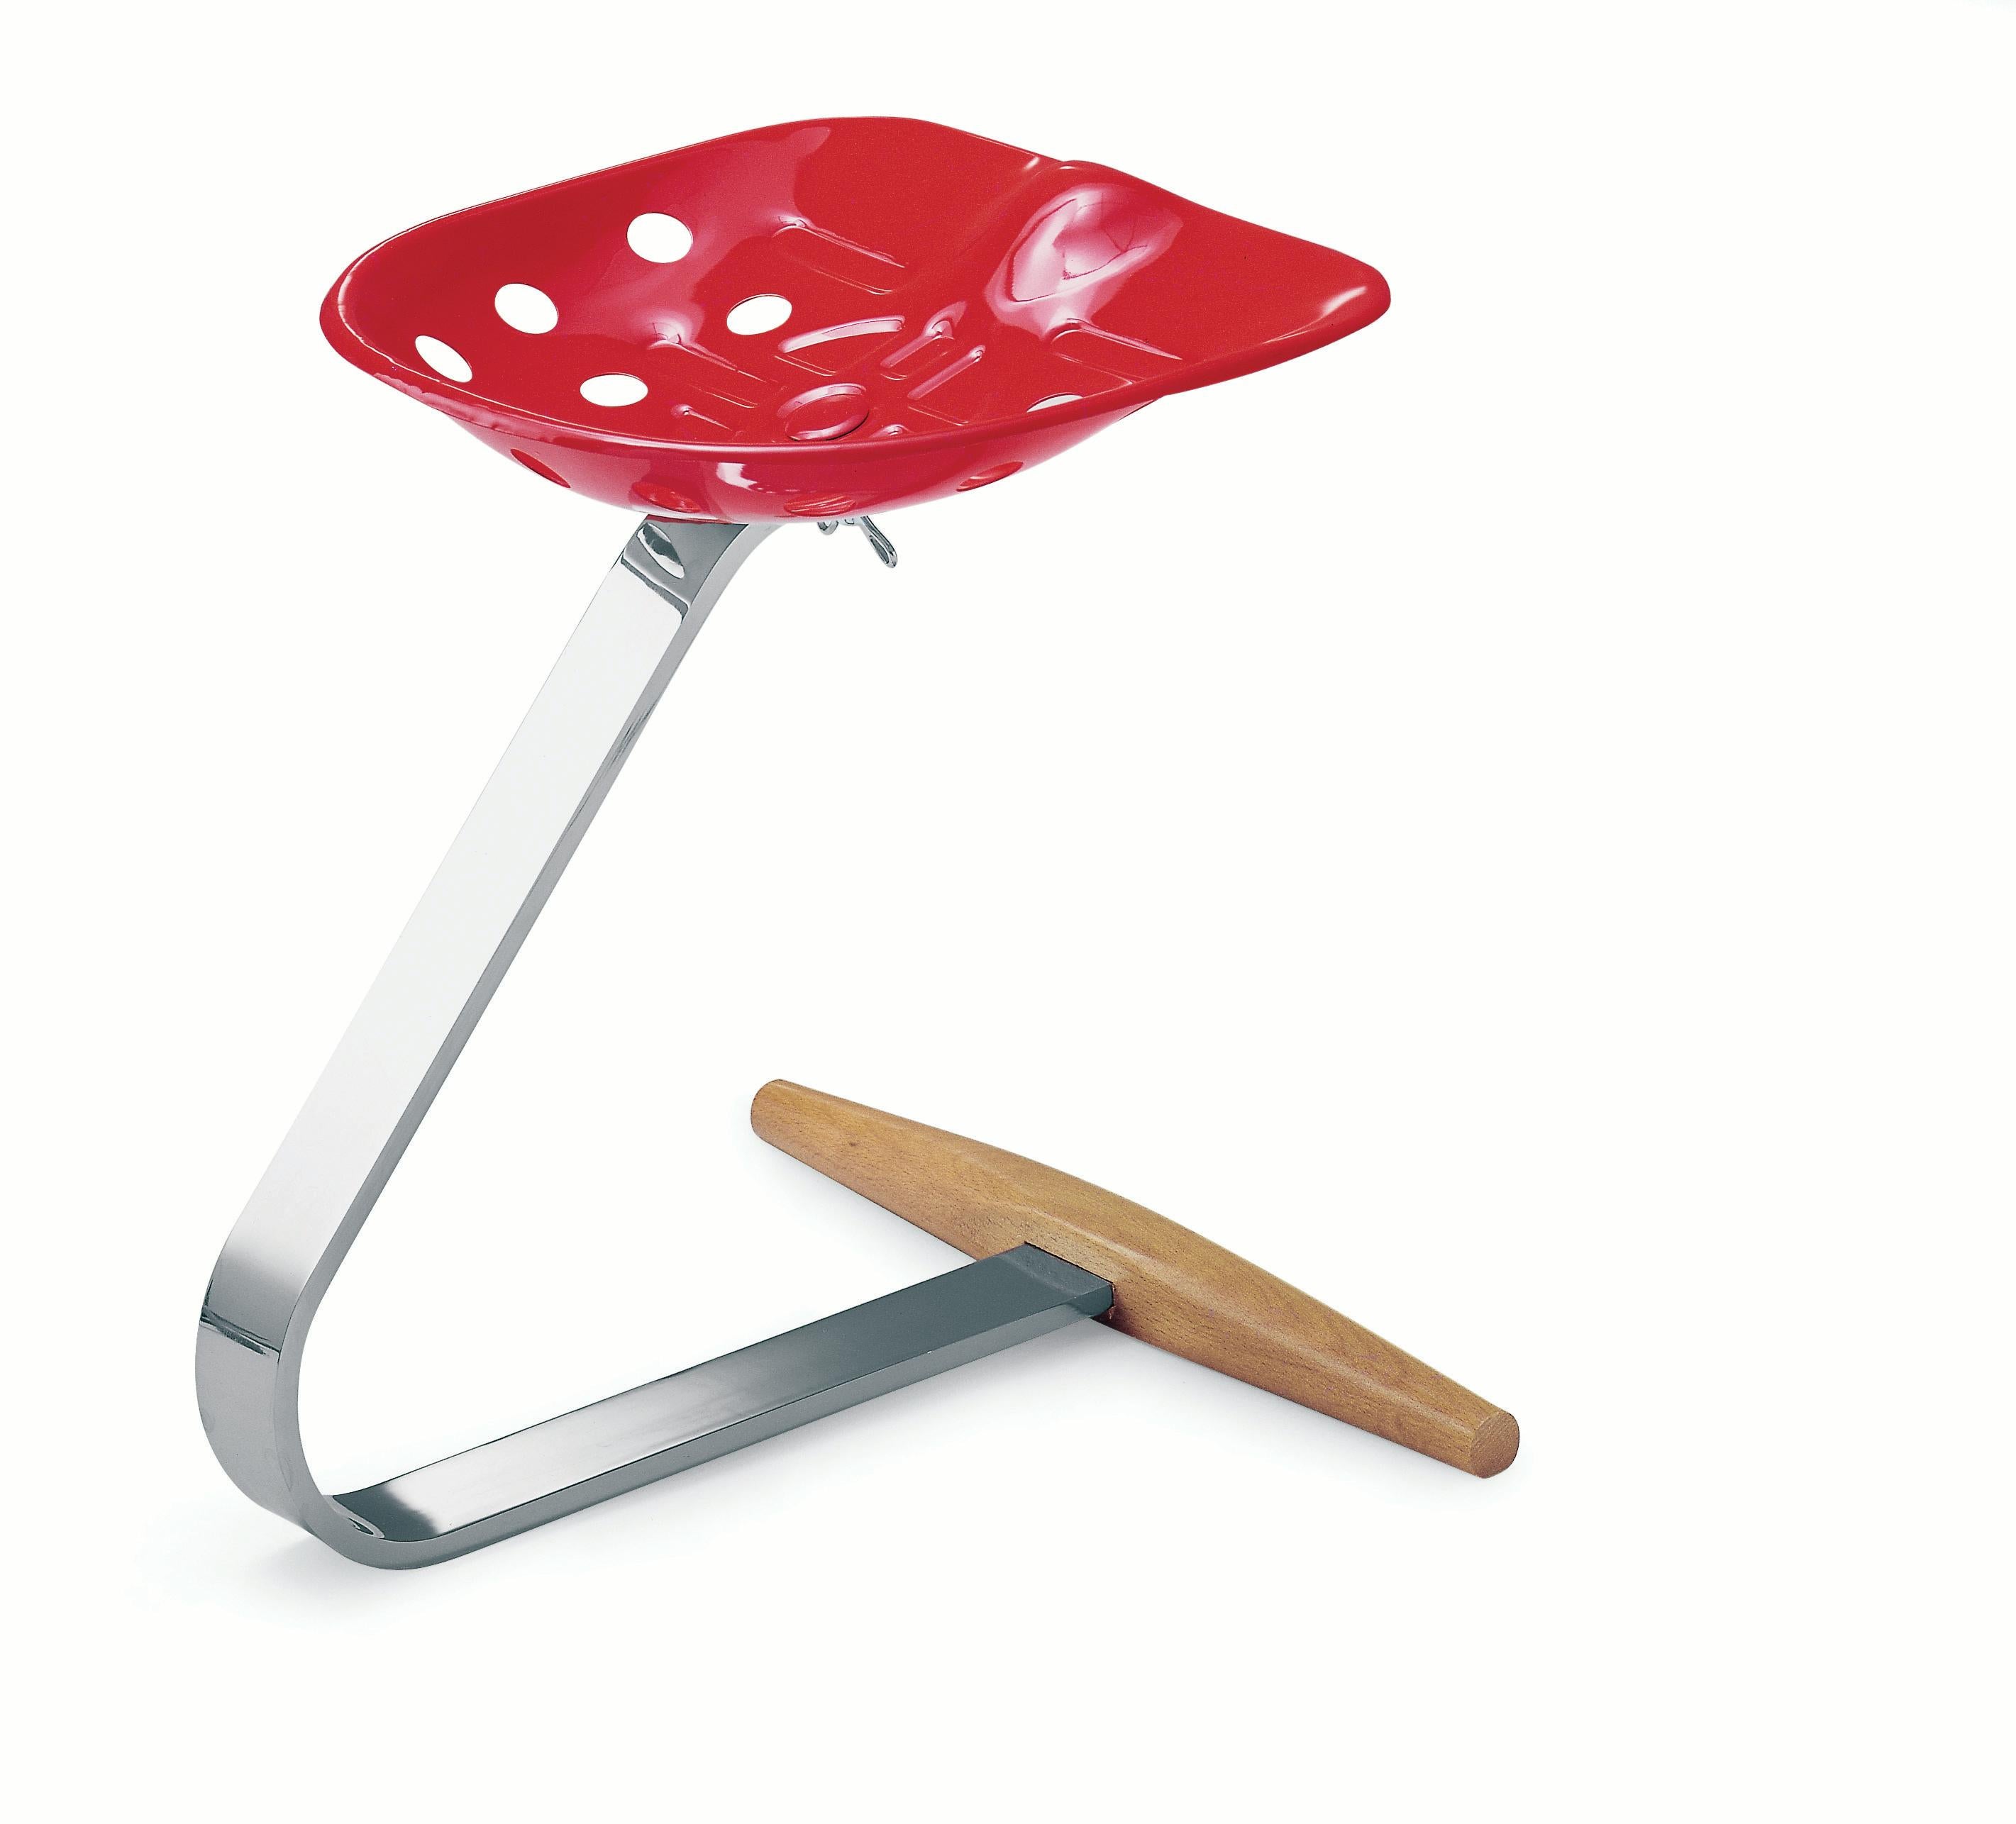 Zanotta Mezzadro Stool in Red with Chromium Plated Steel Stem & Beech Base

Chromium-plated steel stem. Seat lacquered in the colours: orange, red, yellow, white or black. Footrest in steam-treated beech, natural colour.

How great those years